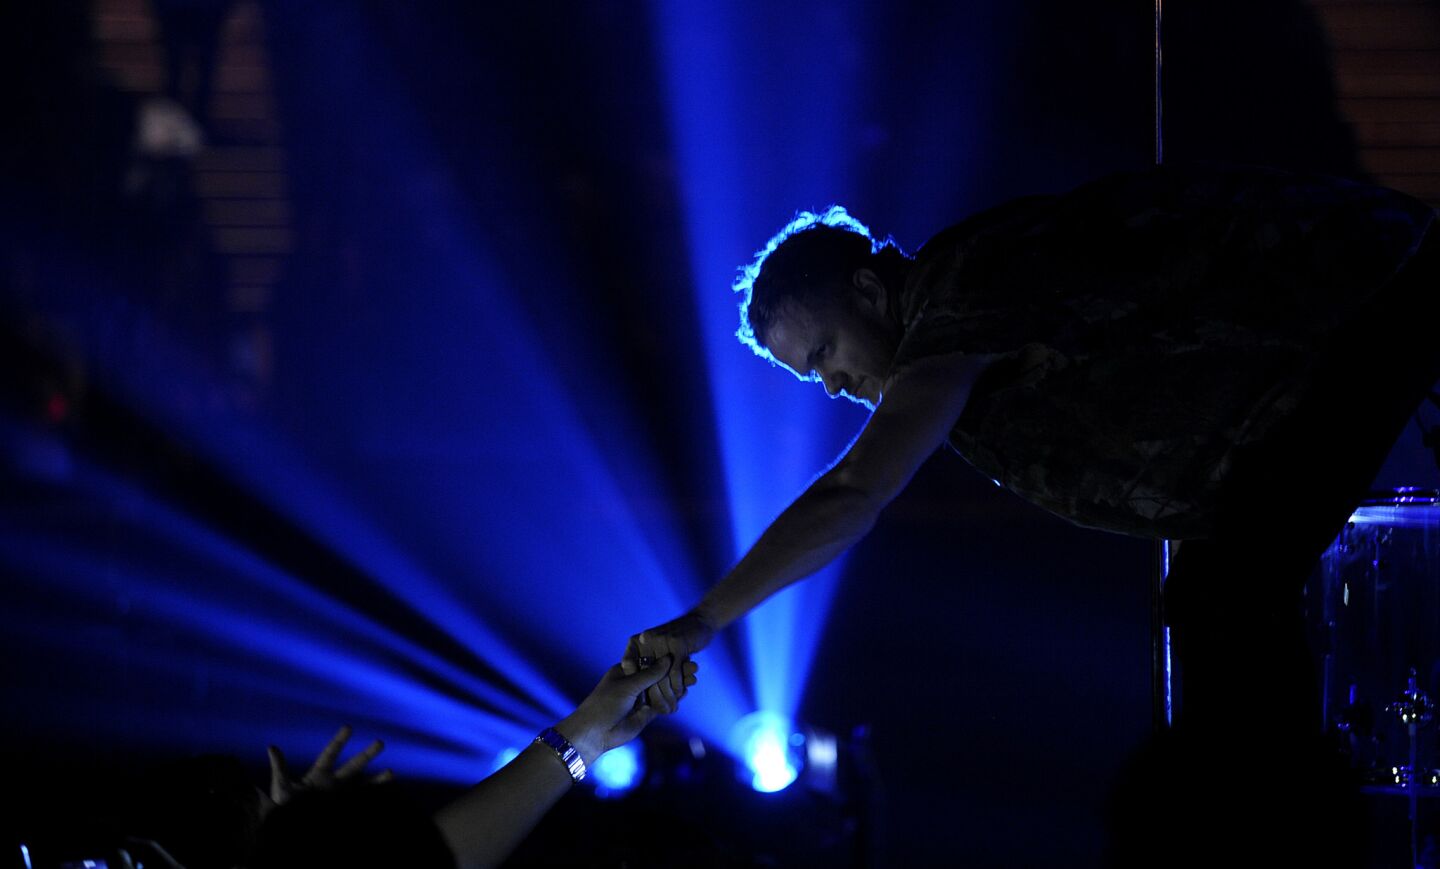 Concert photos by The Times | Imagine Dragons